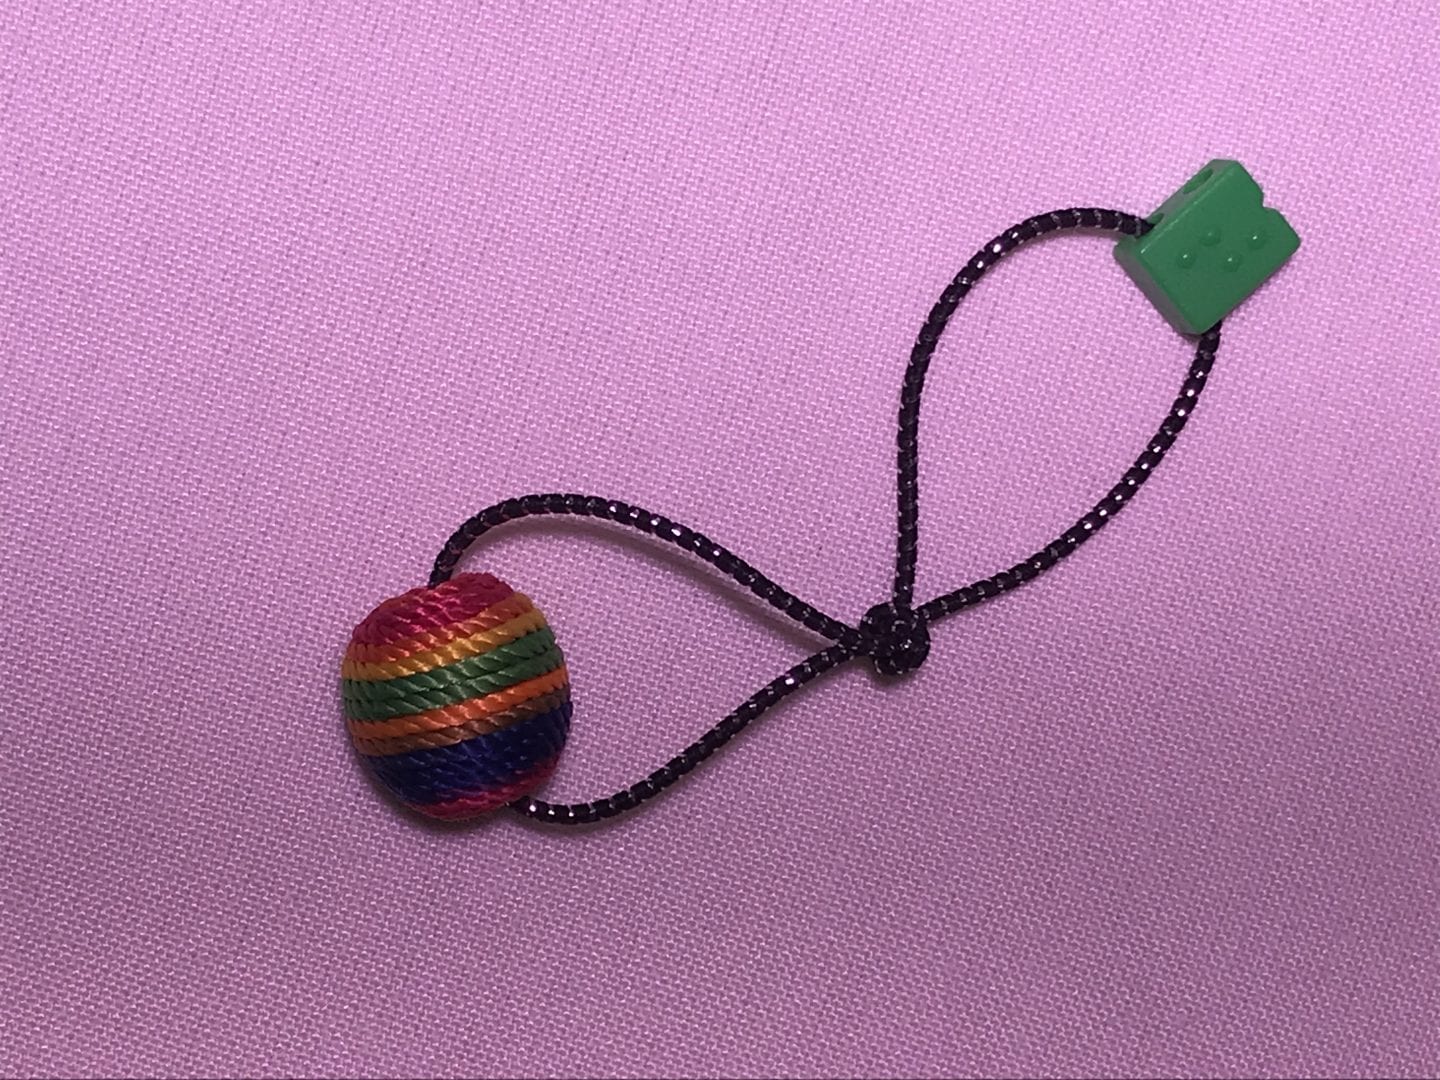 a hair elastic on a purple background. on one end is a large craft bead, on the other end is a smaller green braille bead, and in the middle the elastic is in a knot 